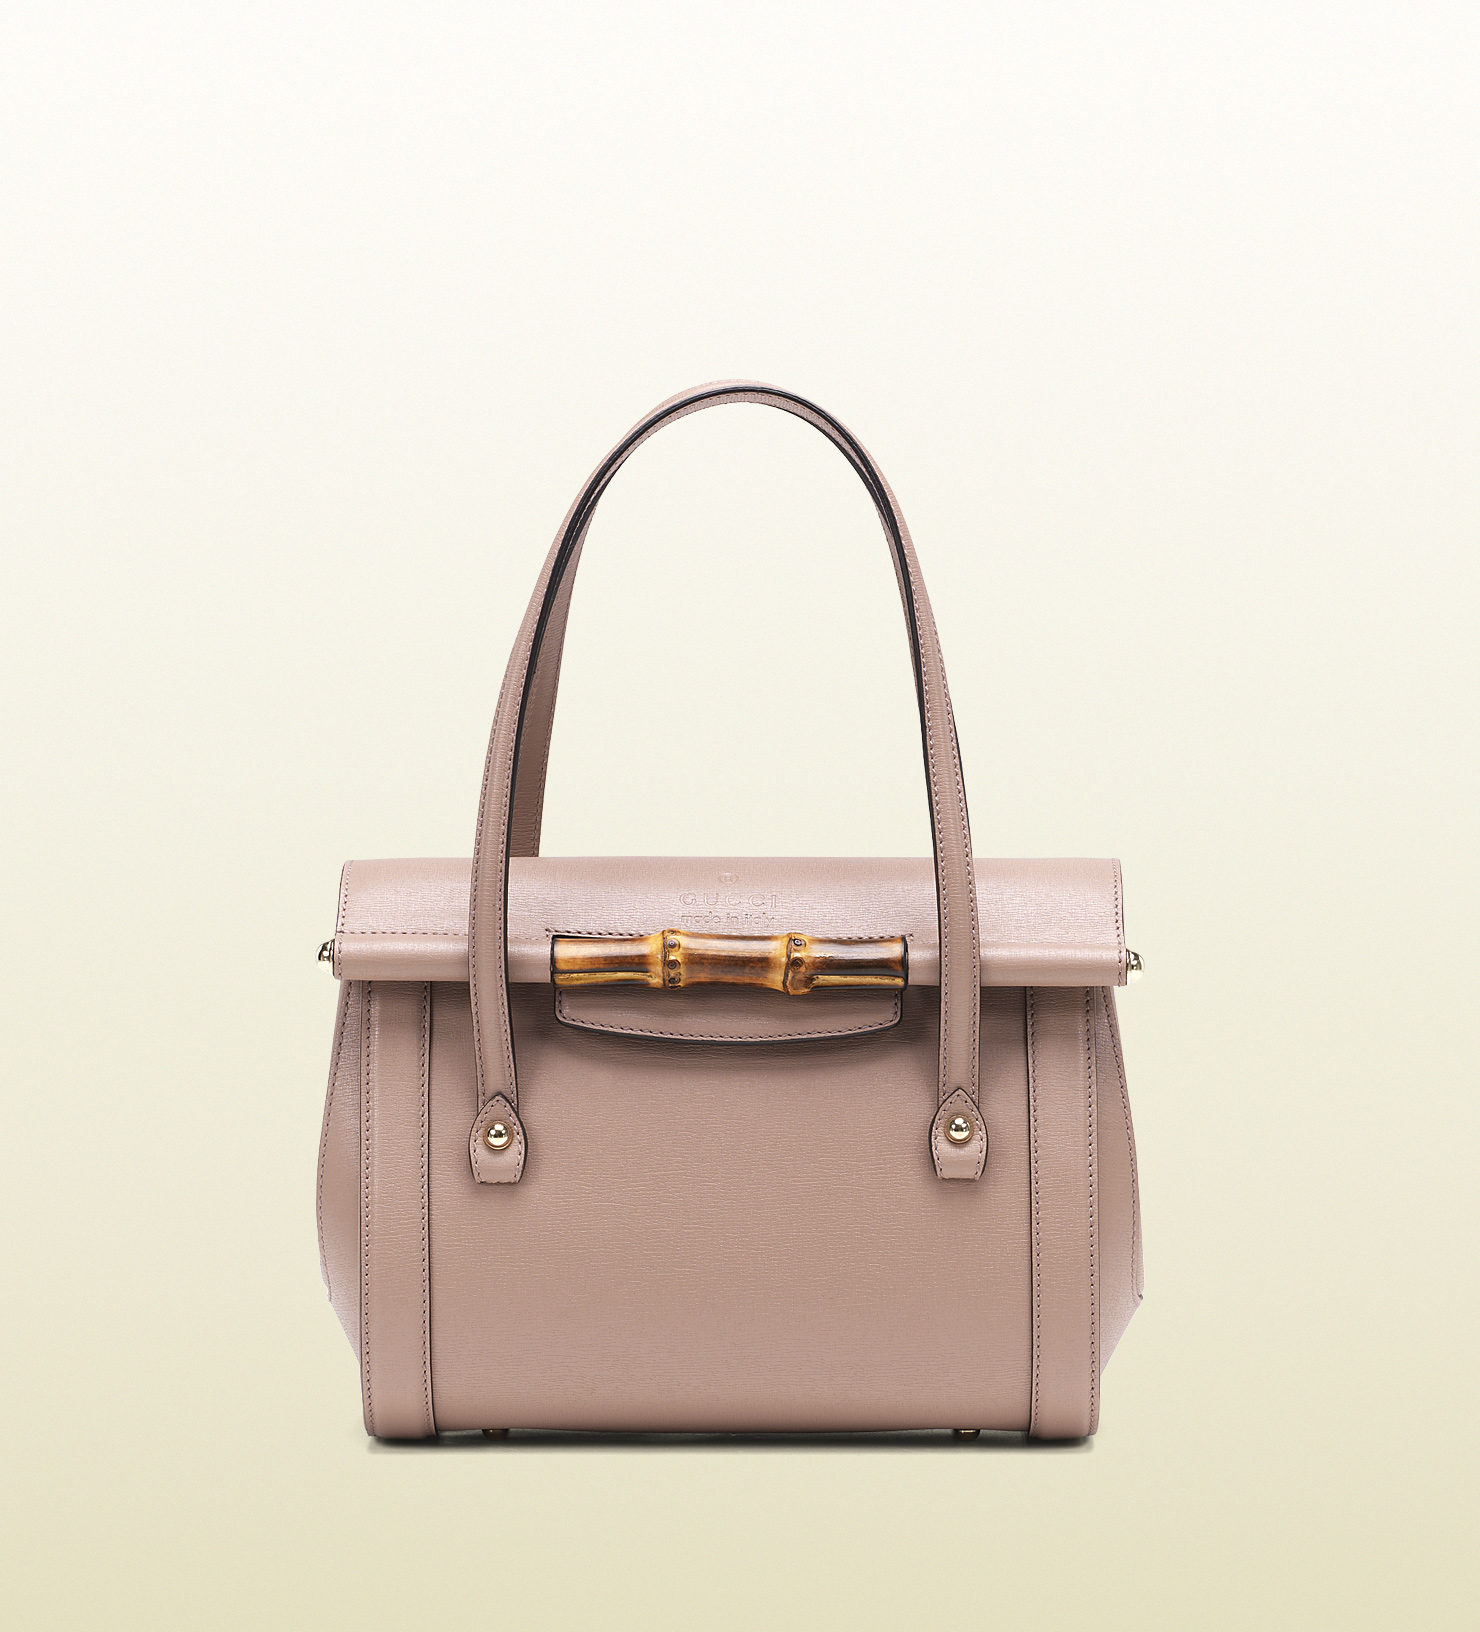 Gucci Bamboo Leather Top Handle Bag in Pink | Lyst